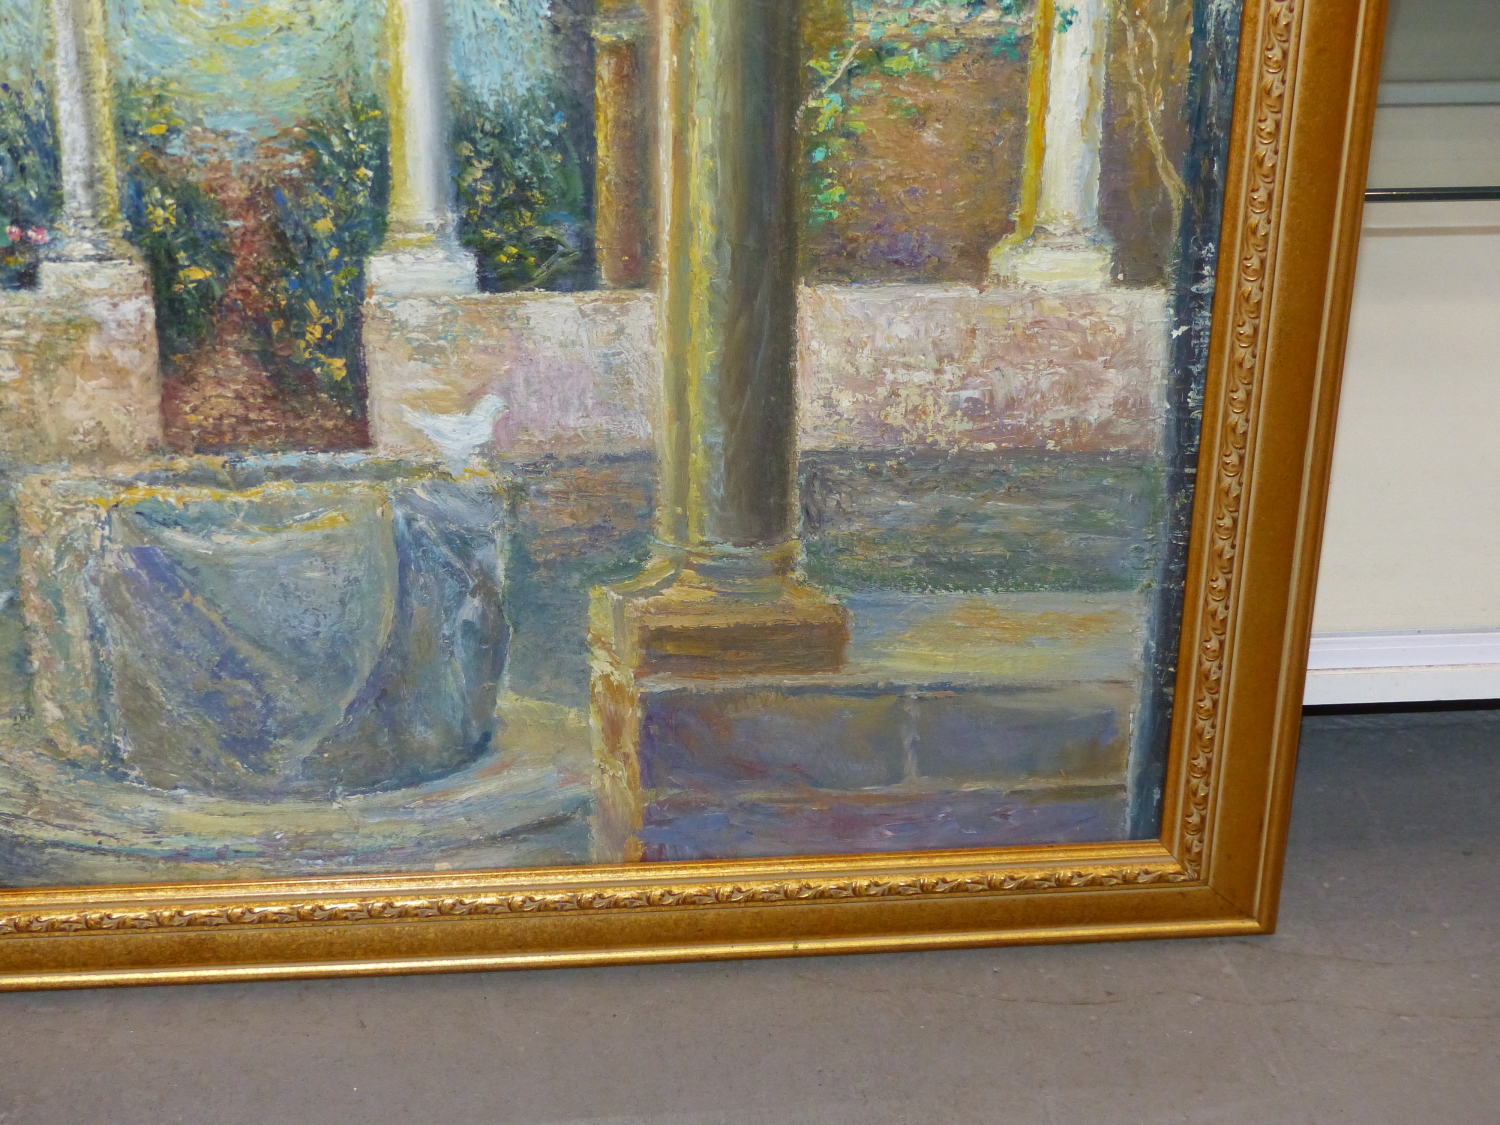 CONTINENTAL SCHOOL (20TH CENTURY), INTERIOR COURTYARD SCENE WITH DOVES AROUND A WELL, IMPASTO OIL, - Image 3 of 6